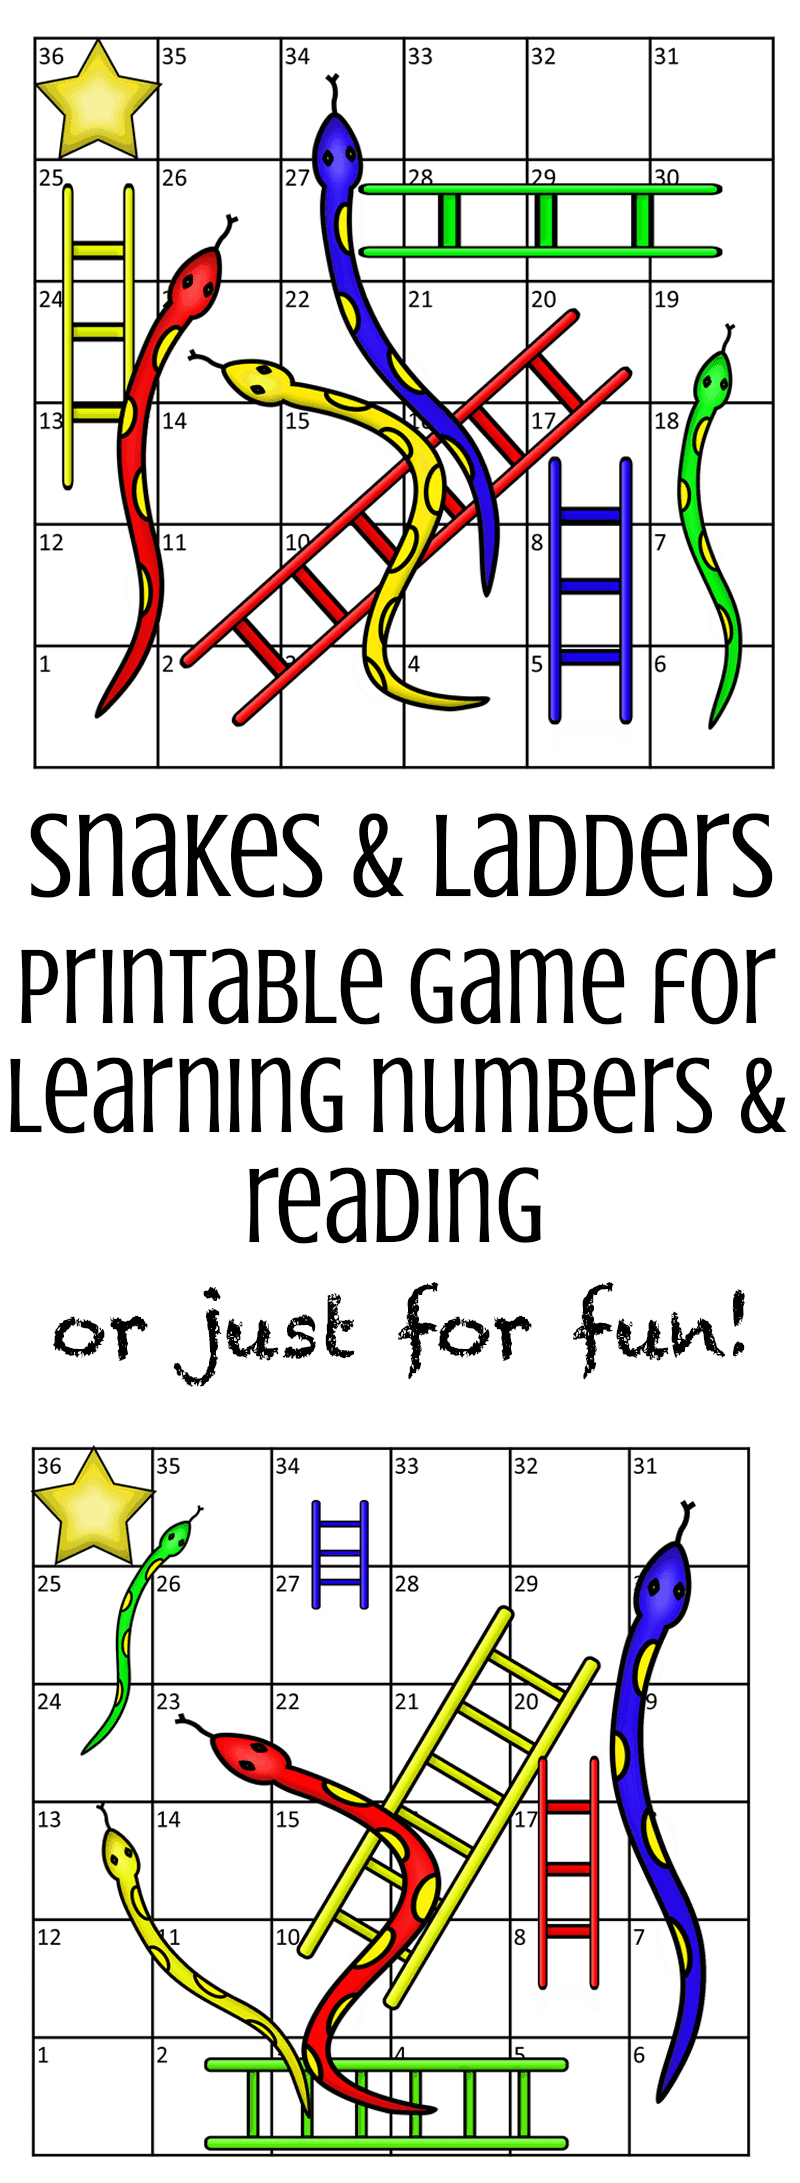 Snakes, Dots and Ladders is the ultimate 2 in 1 game. Play the